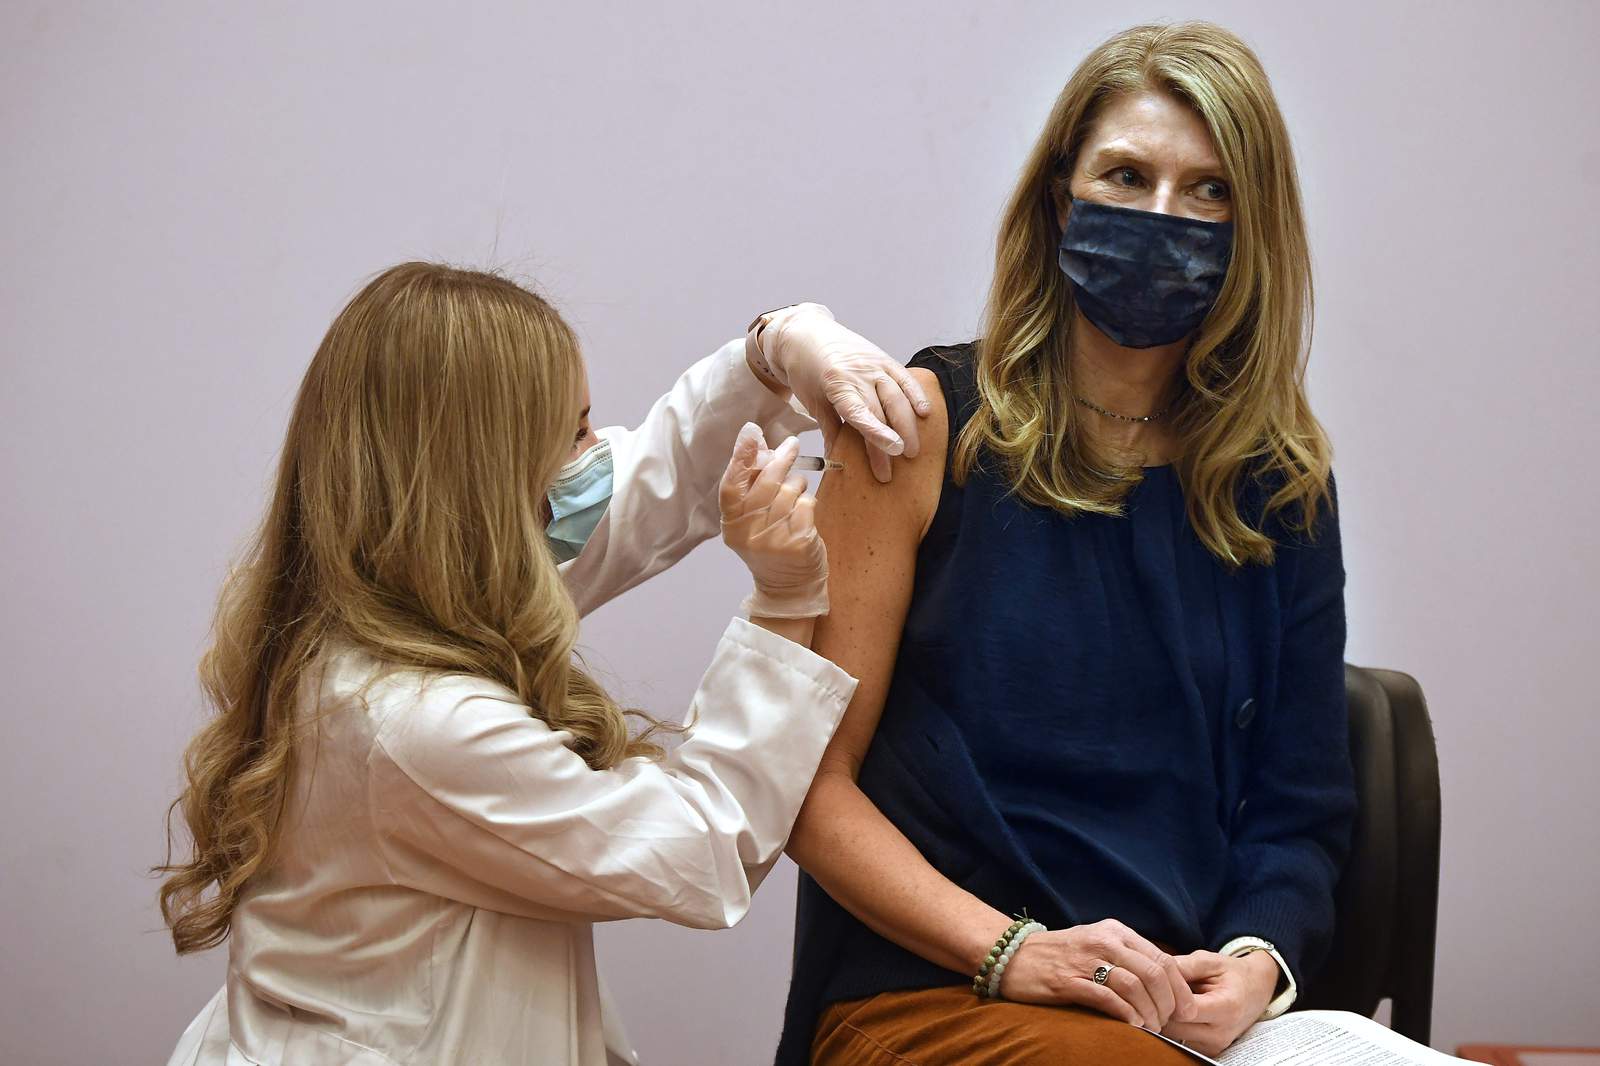 Fully vaccinated people can gather without masks, CDC says